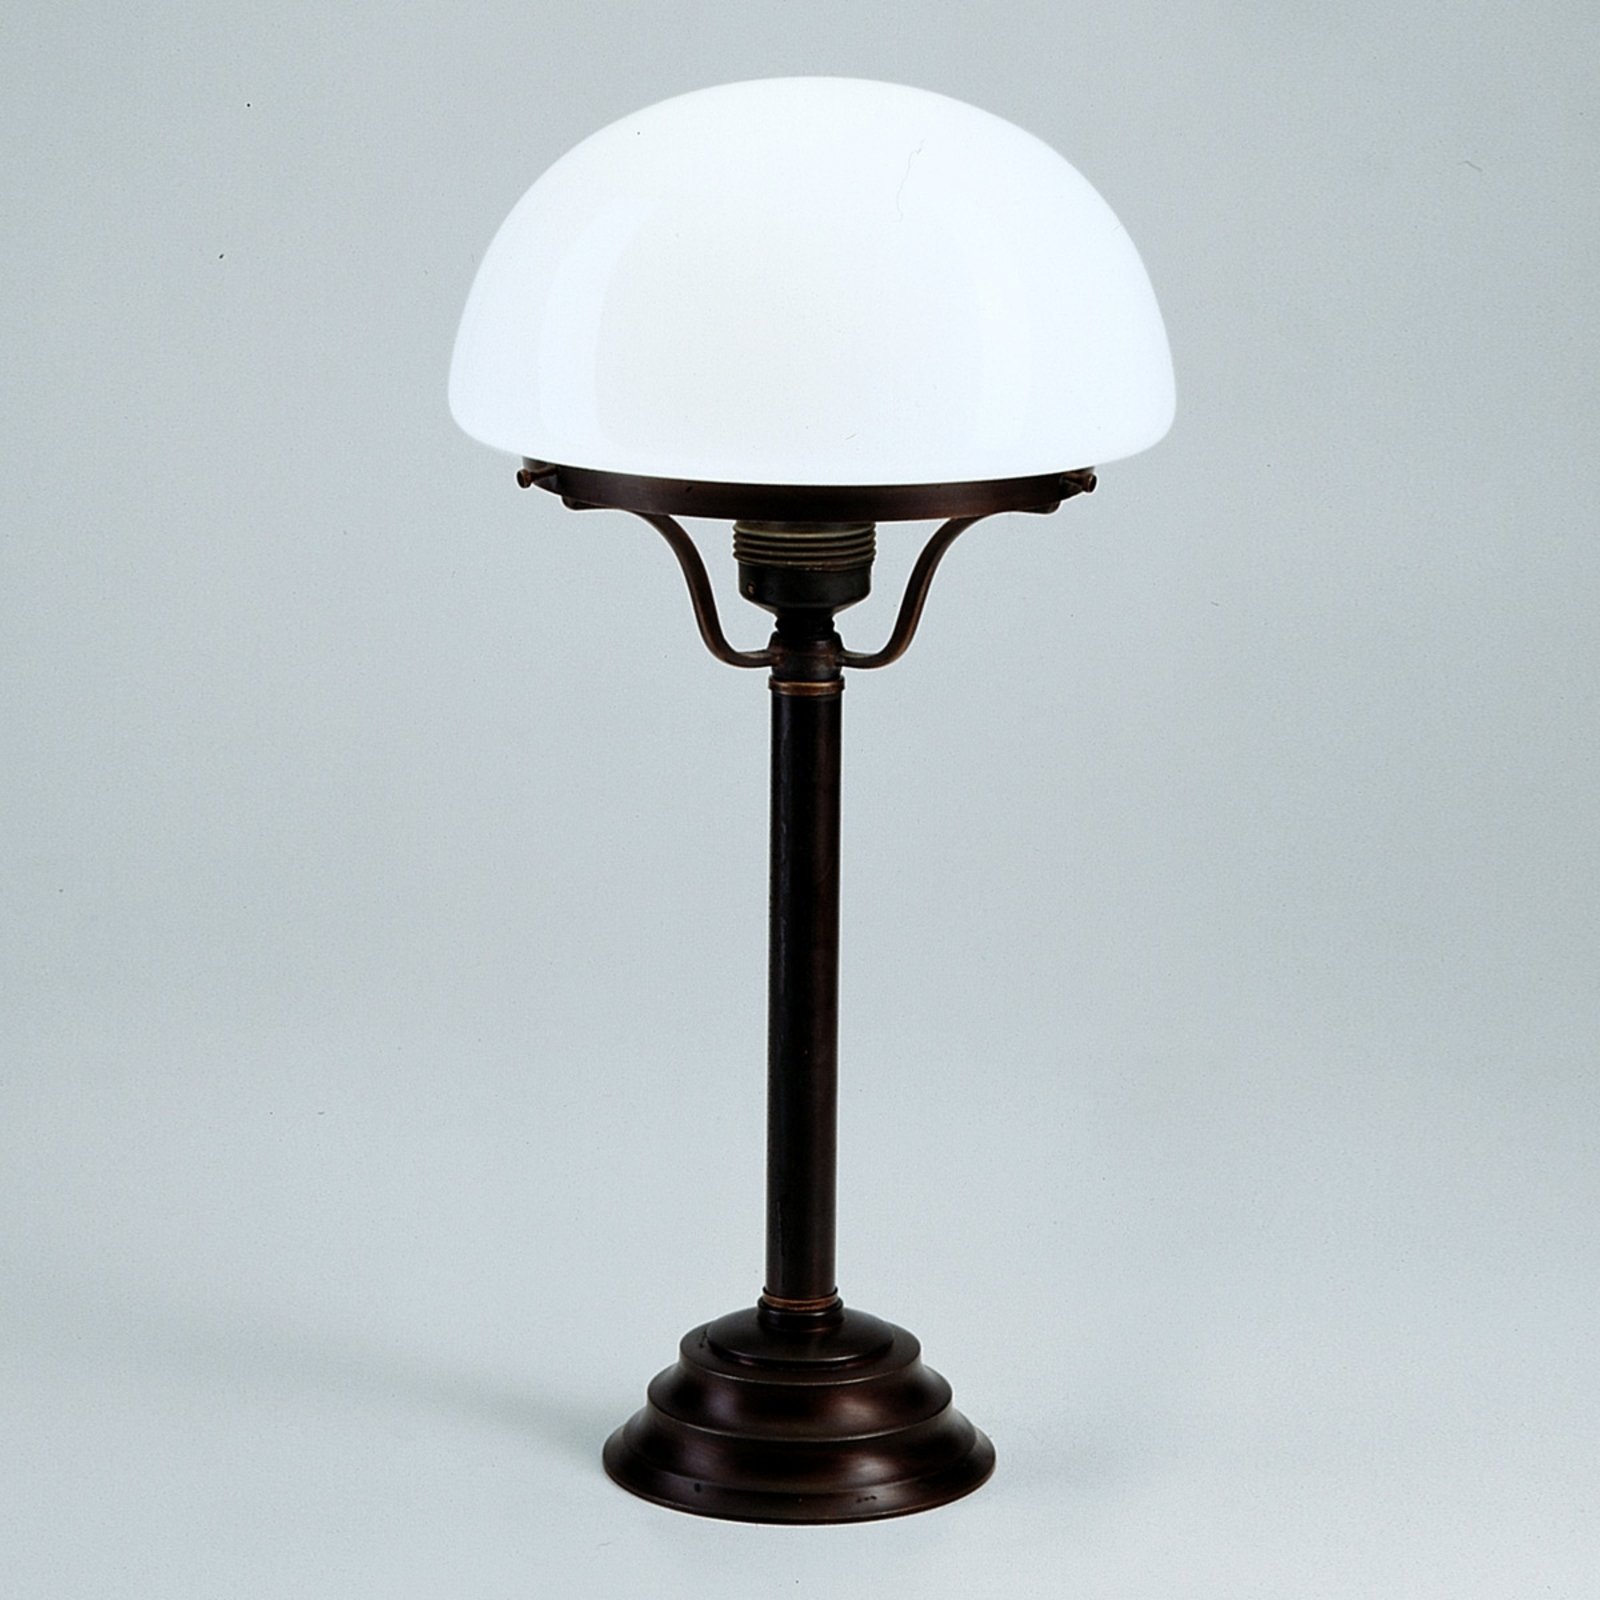 Frank table lamp with antique/rustic appearance